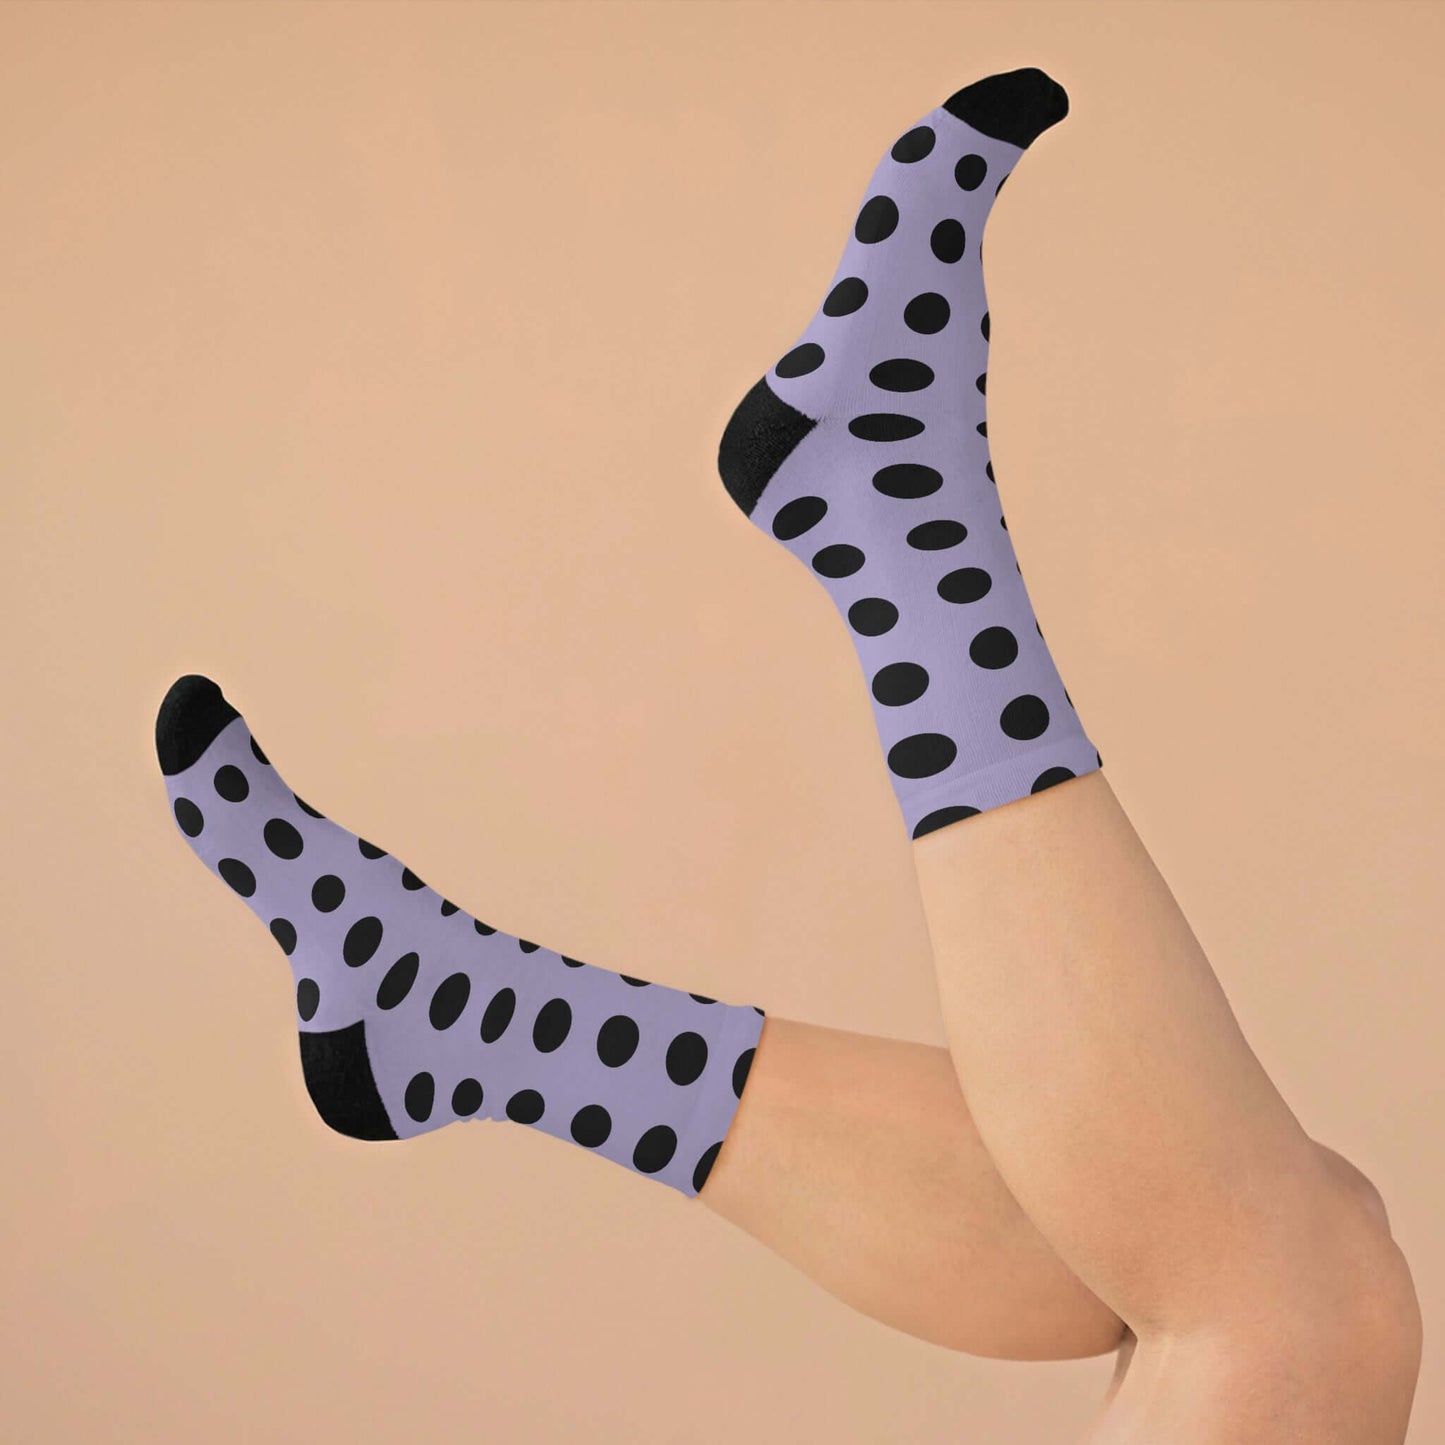 Lavender Dots RecycledSocks